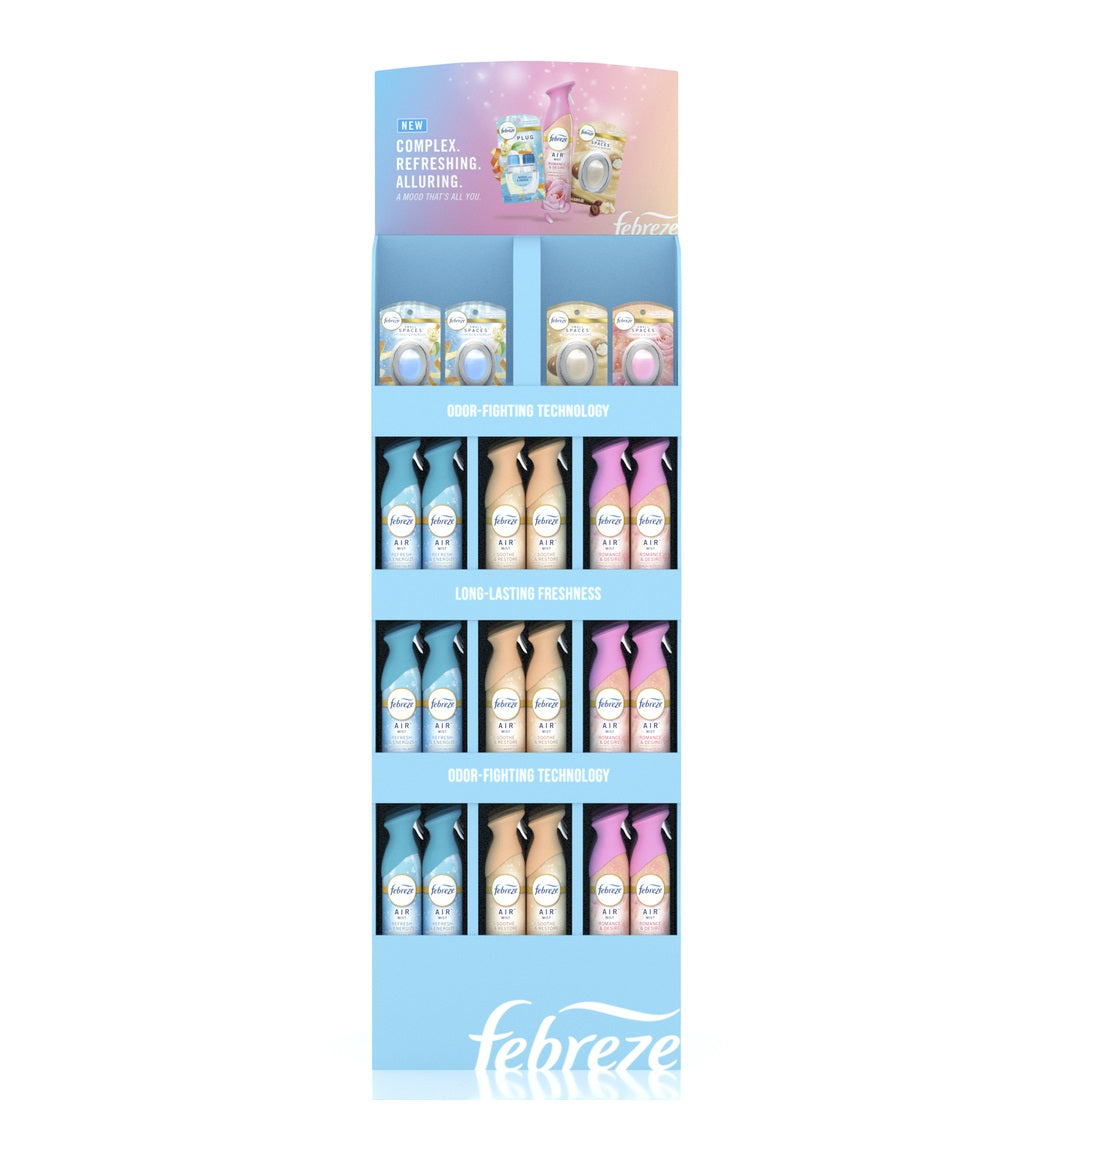 Febreze Mix Floor Stand Display Air Freshener Spray & Small Spaces Mixed Scent - 62ct